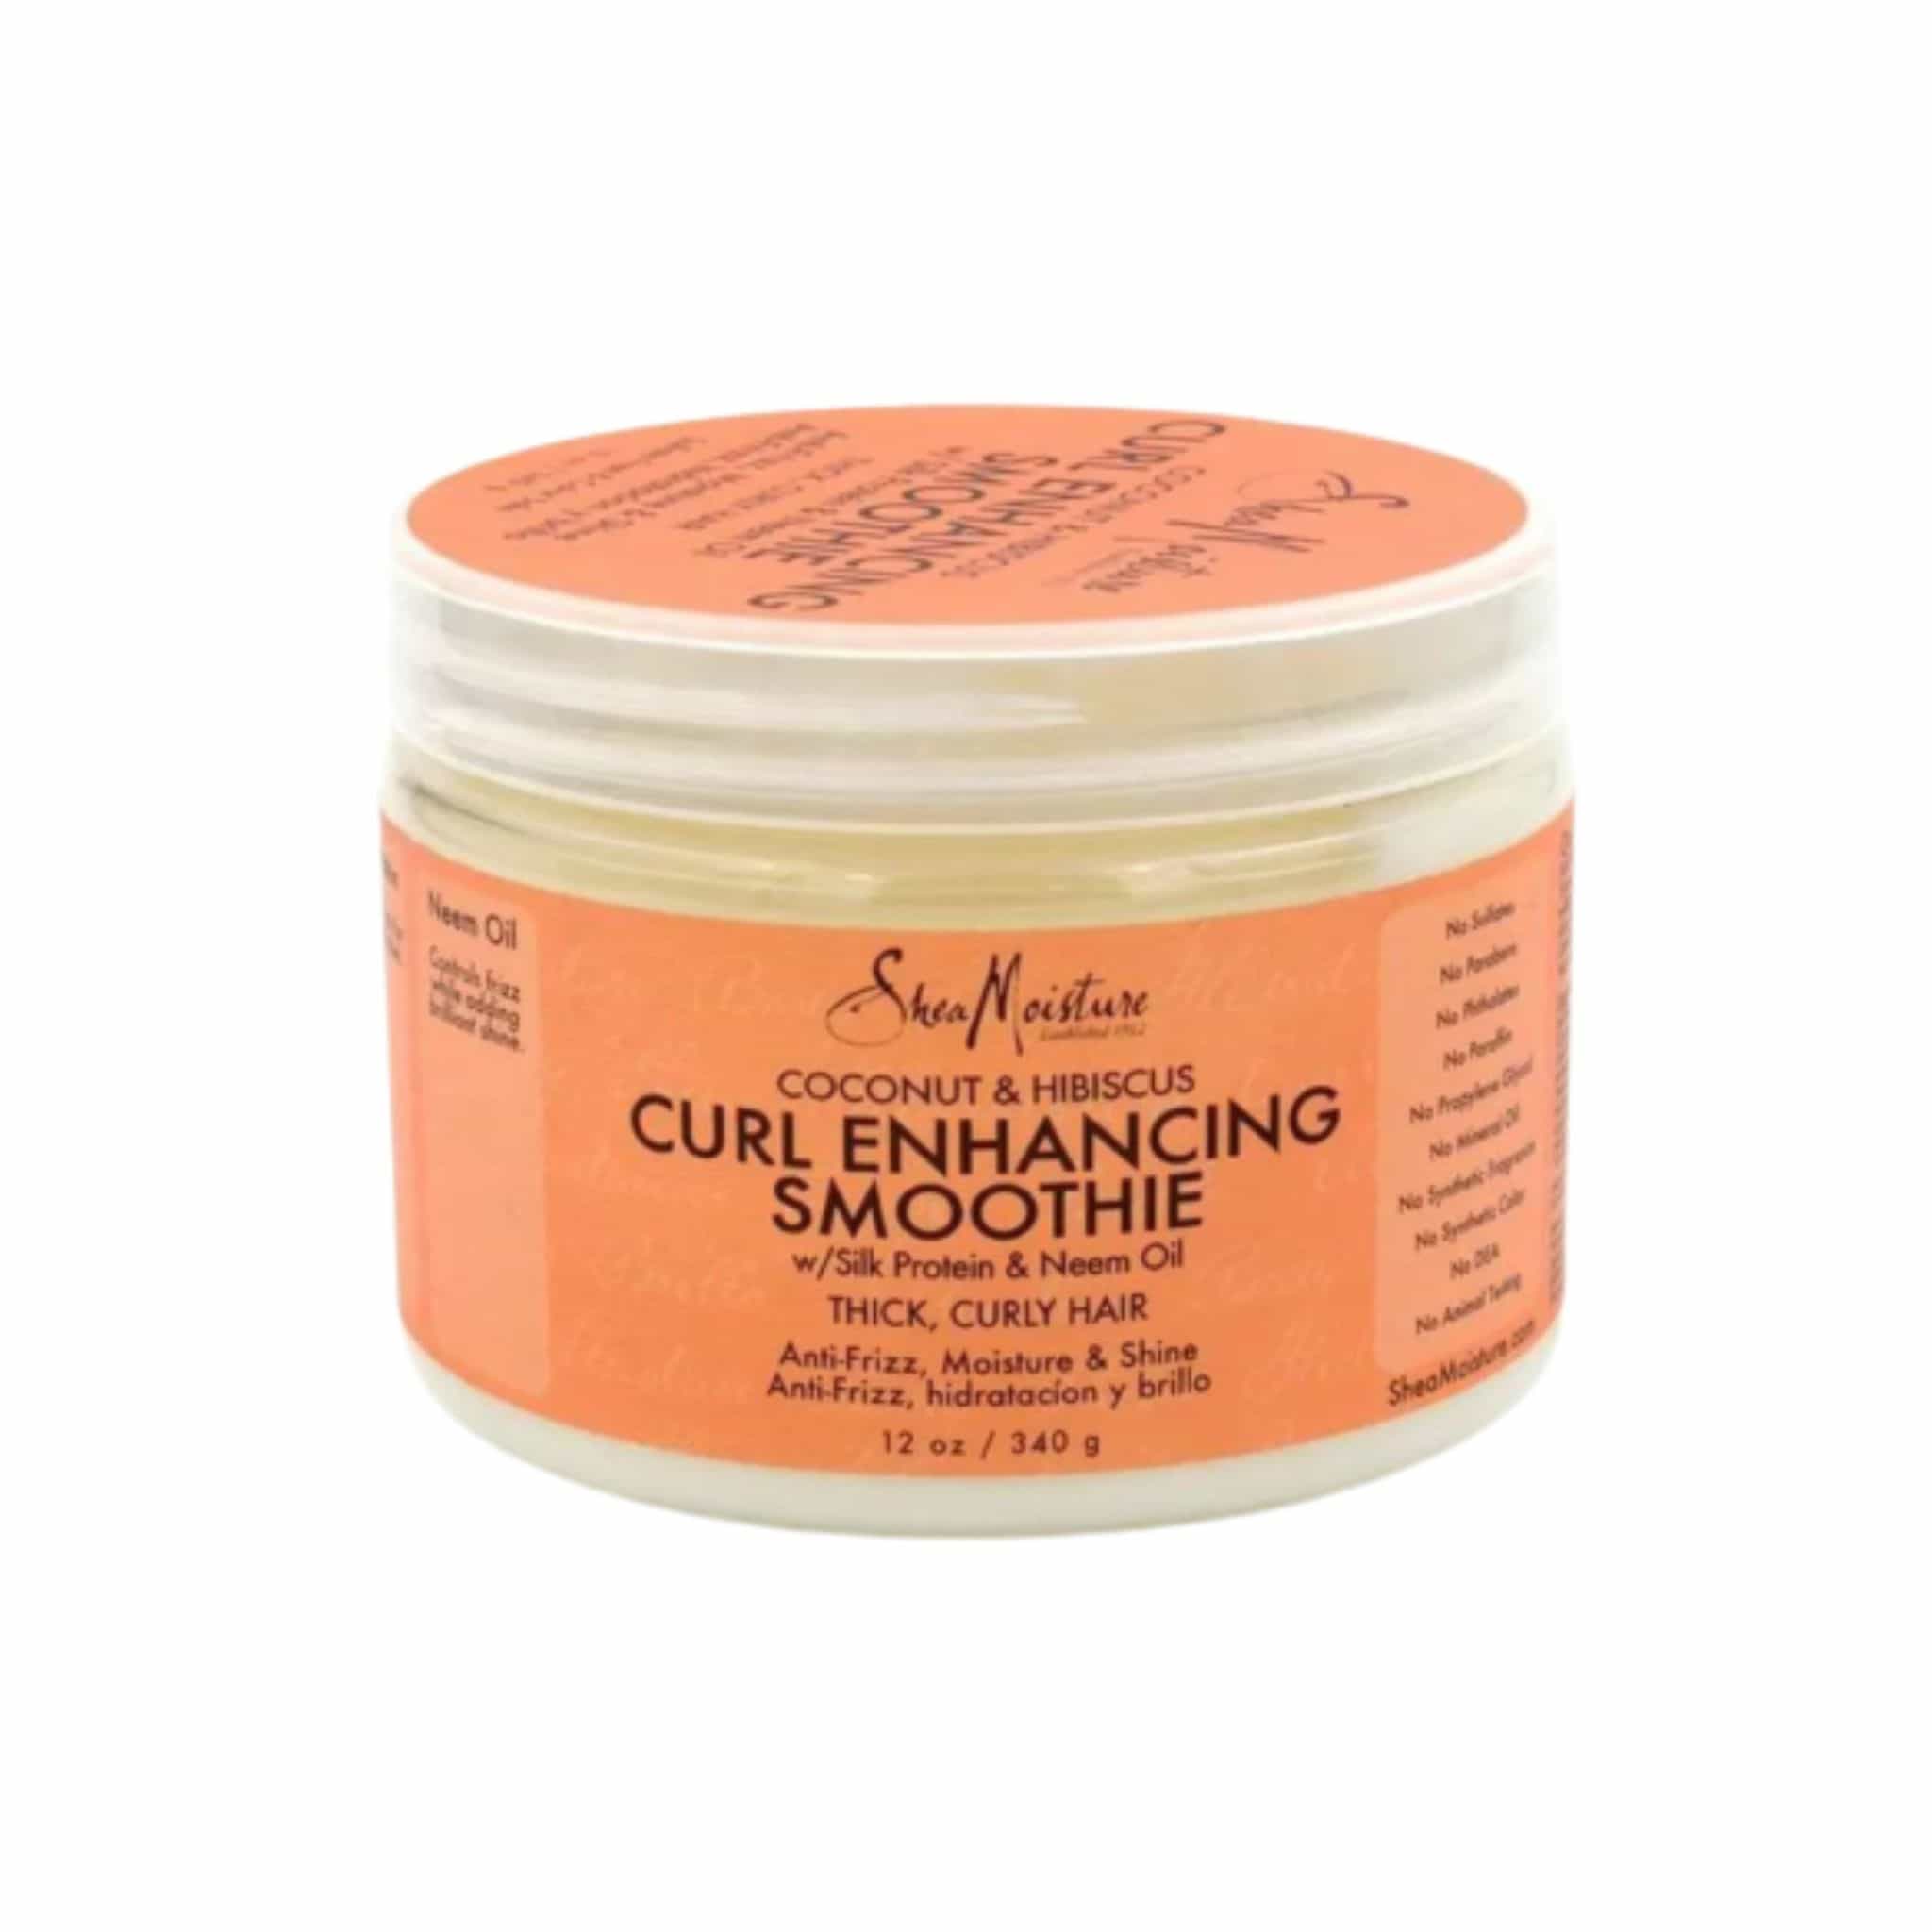 COCONUT & HIBISCUS CURL ENHANCING SMOOTHIE SHEA MOISTURE 340g